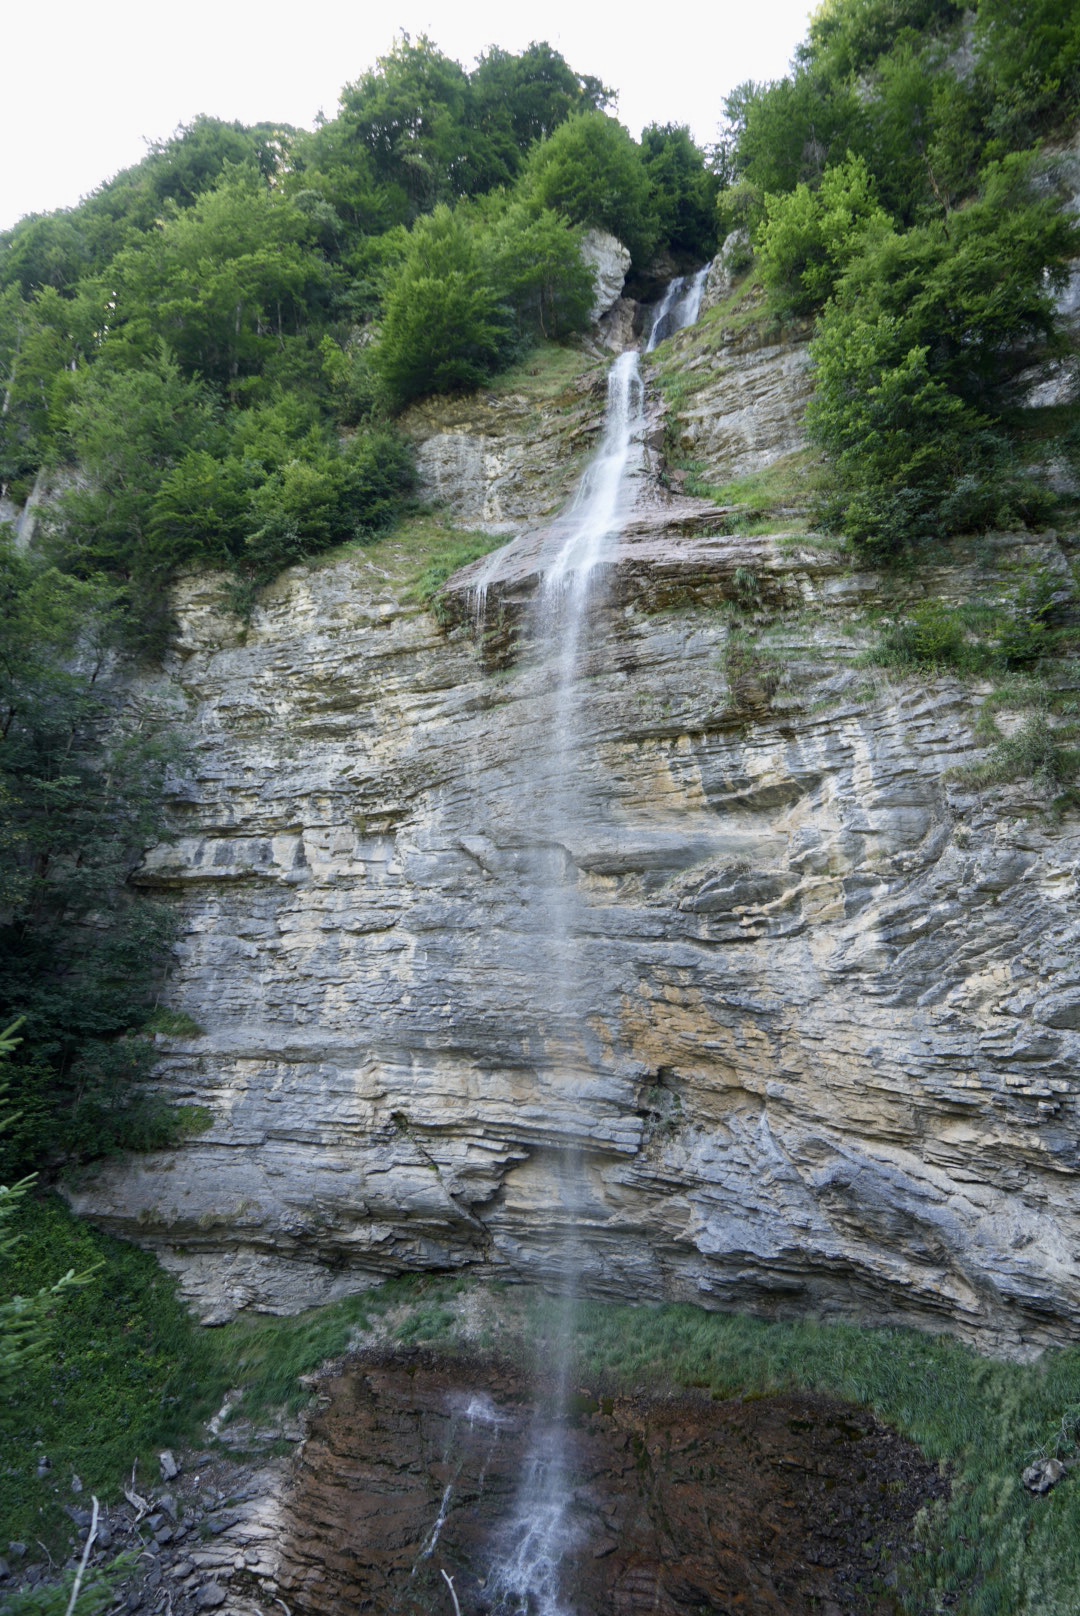 One of the waterfalls nearby Landvogthaus